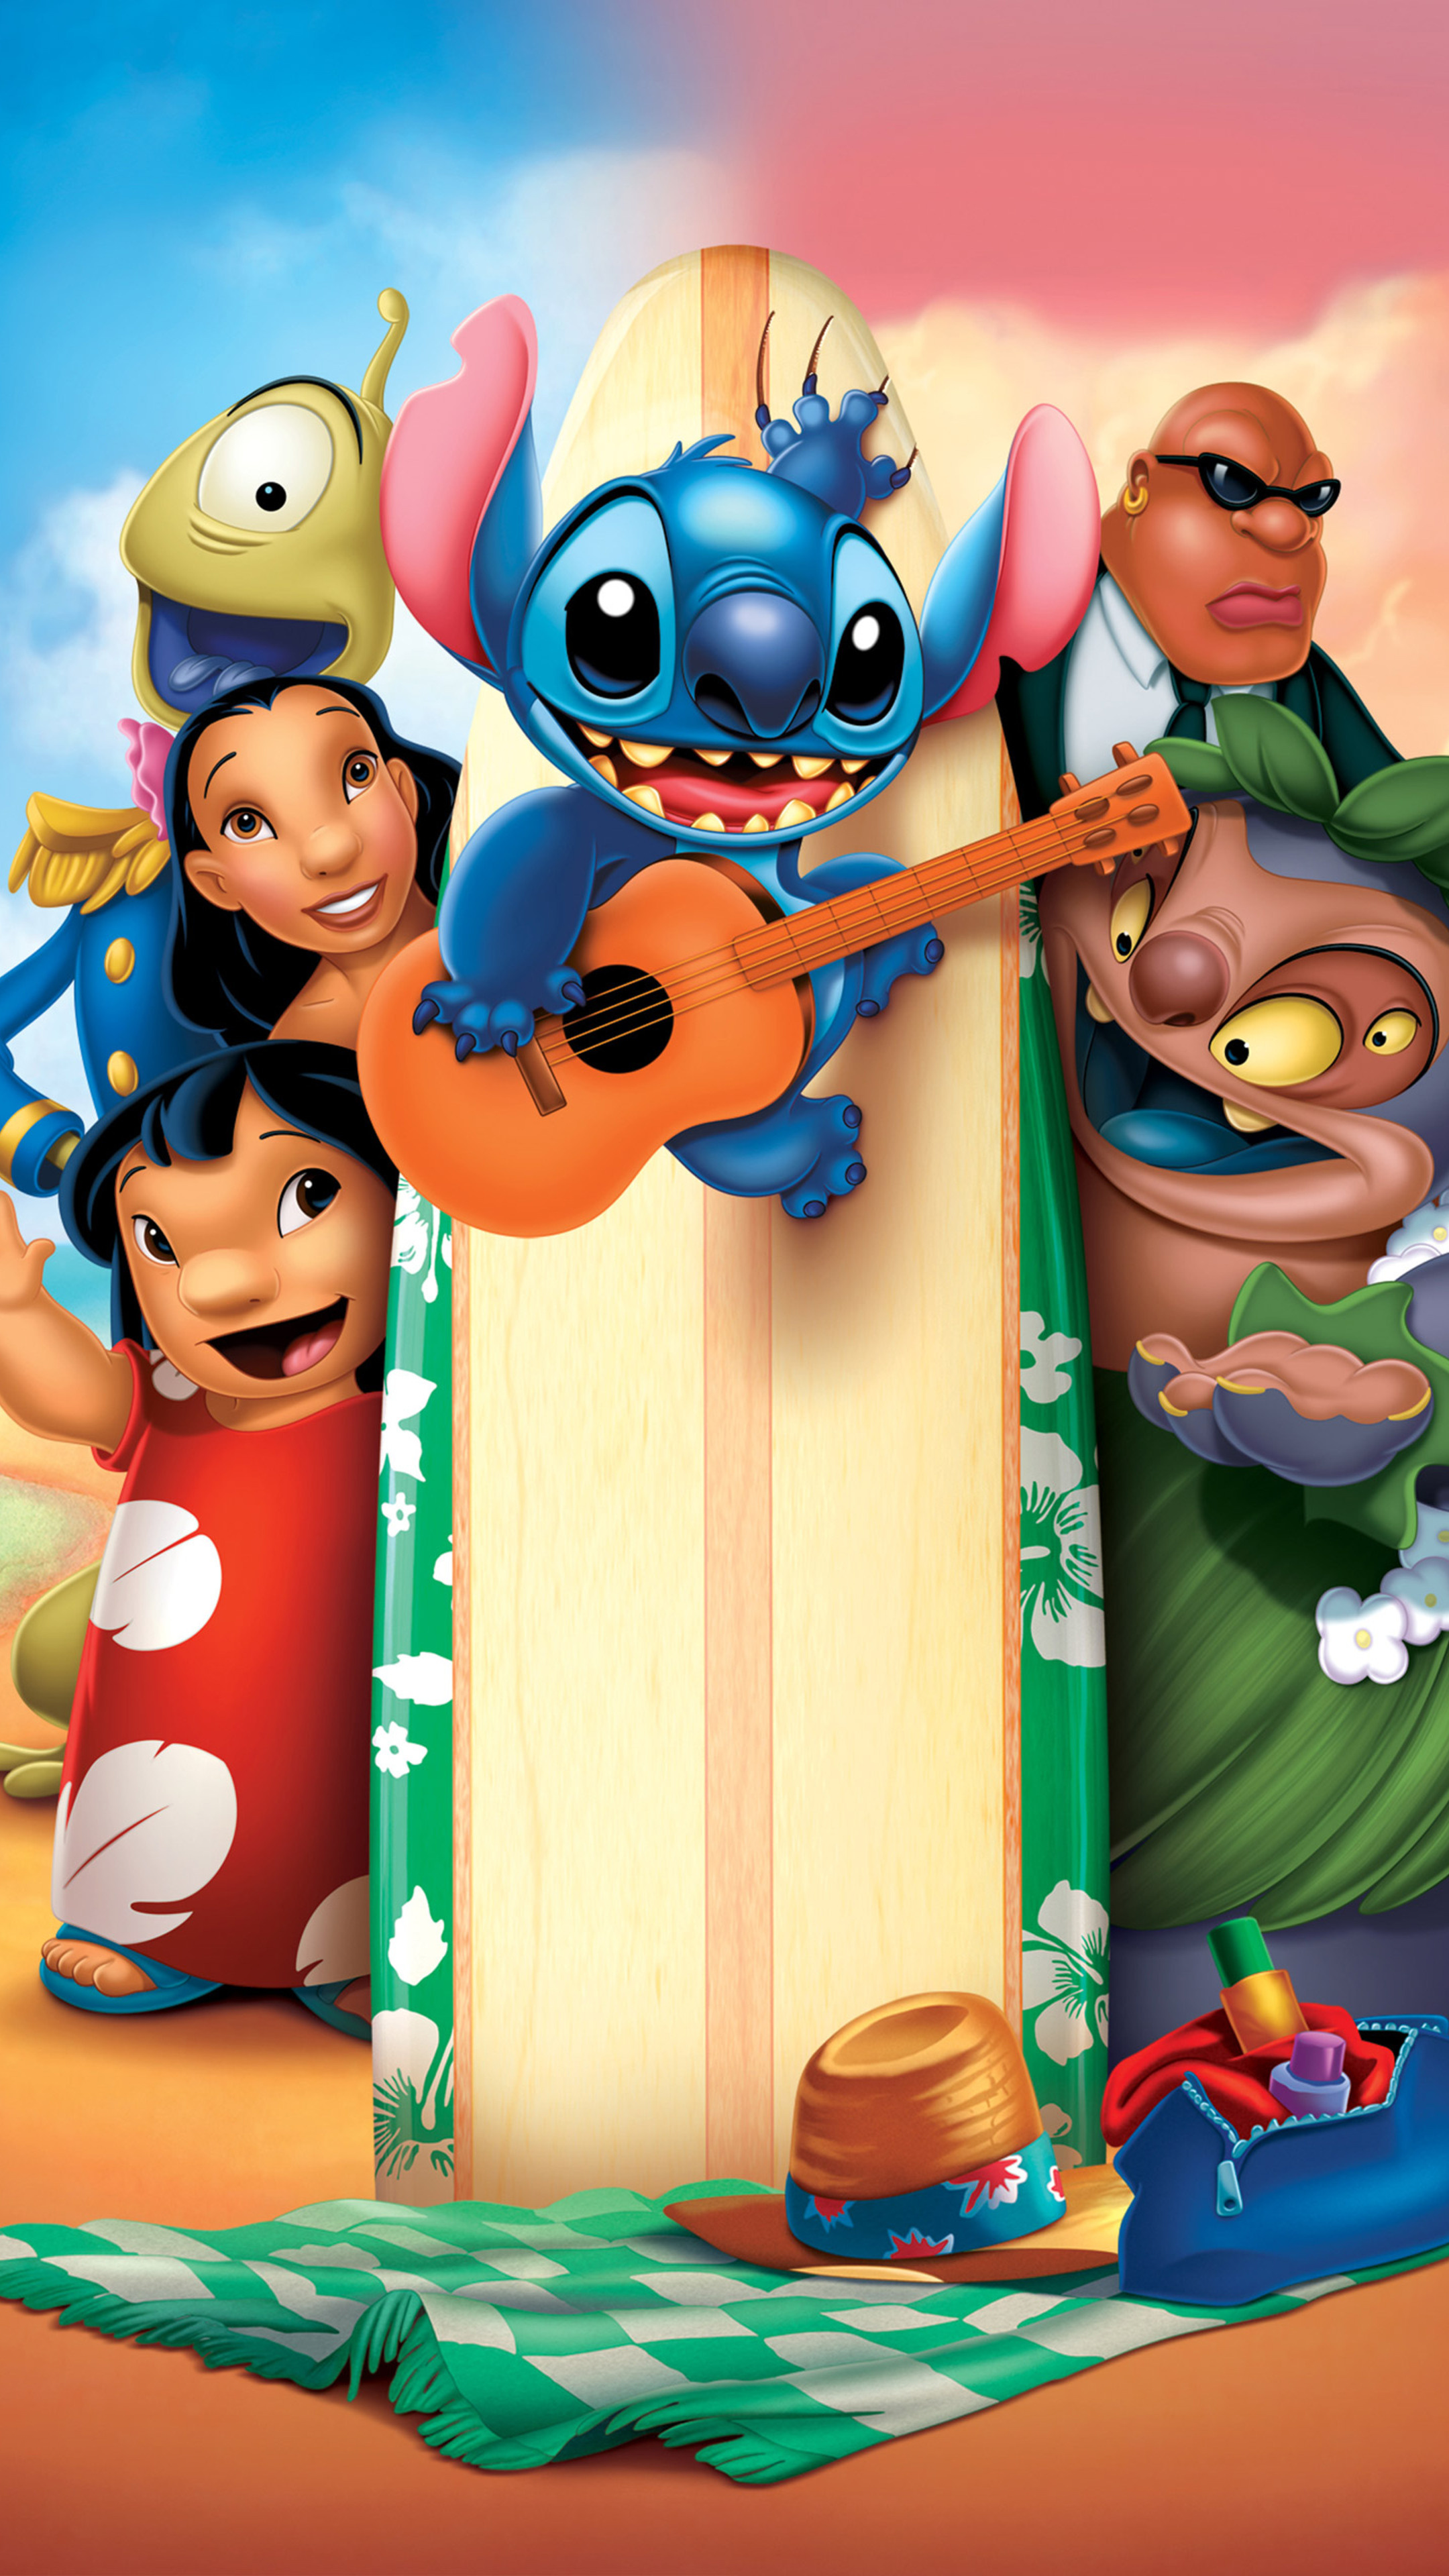 Stitch animation, Lilo and Stitch movie, Sony Xperia wallpapers, HD 4K wallpapers, 2160x3840 4K Phone